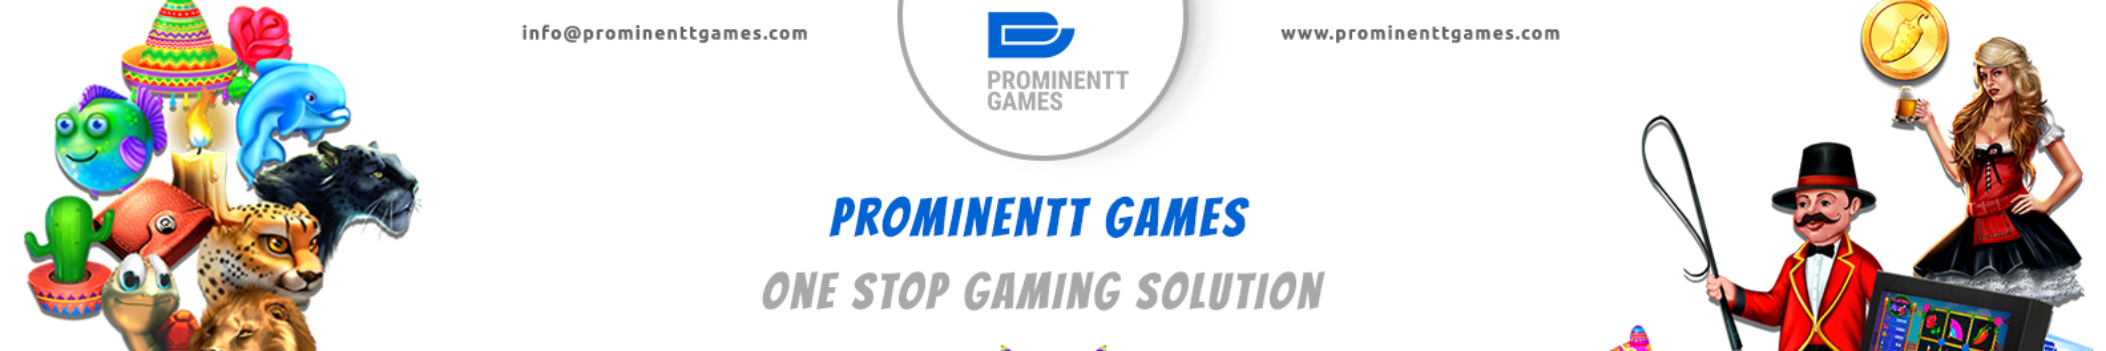 prominenttgames